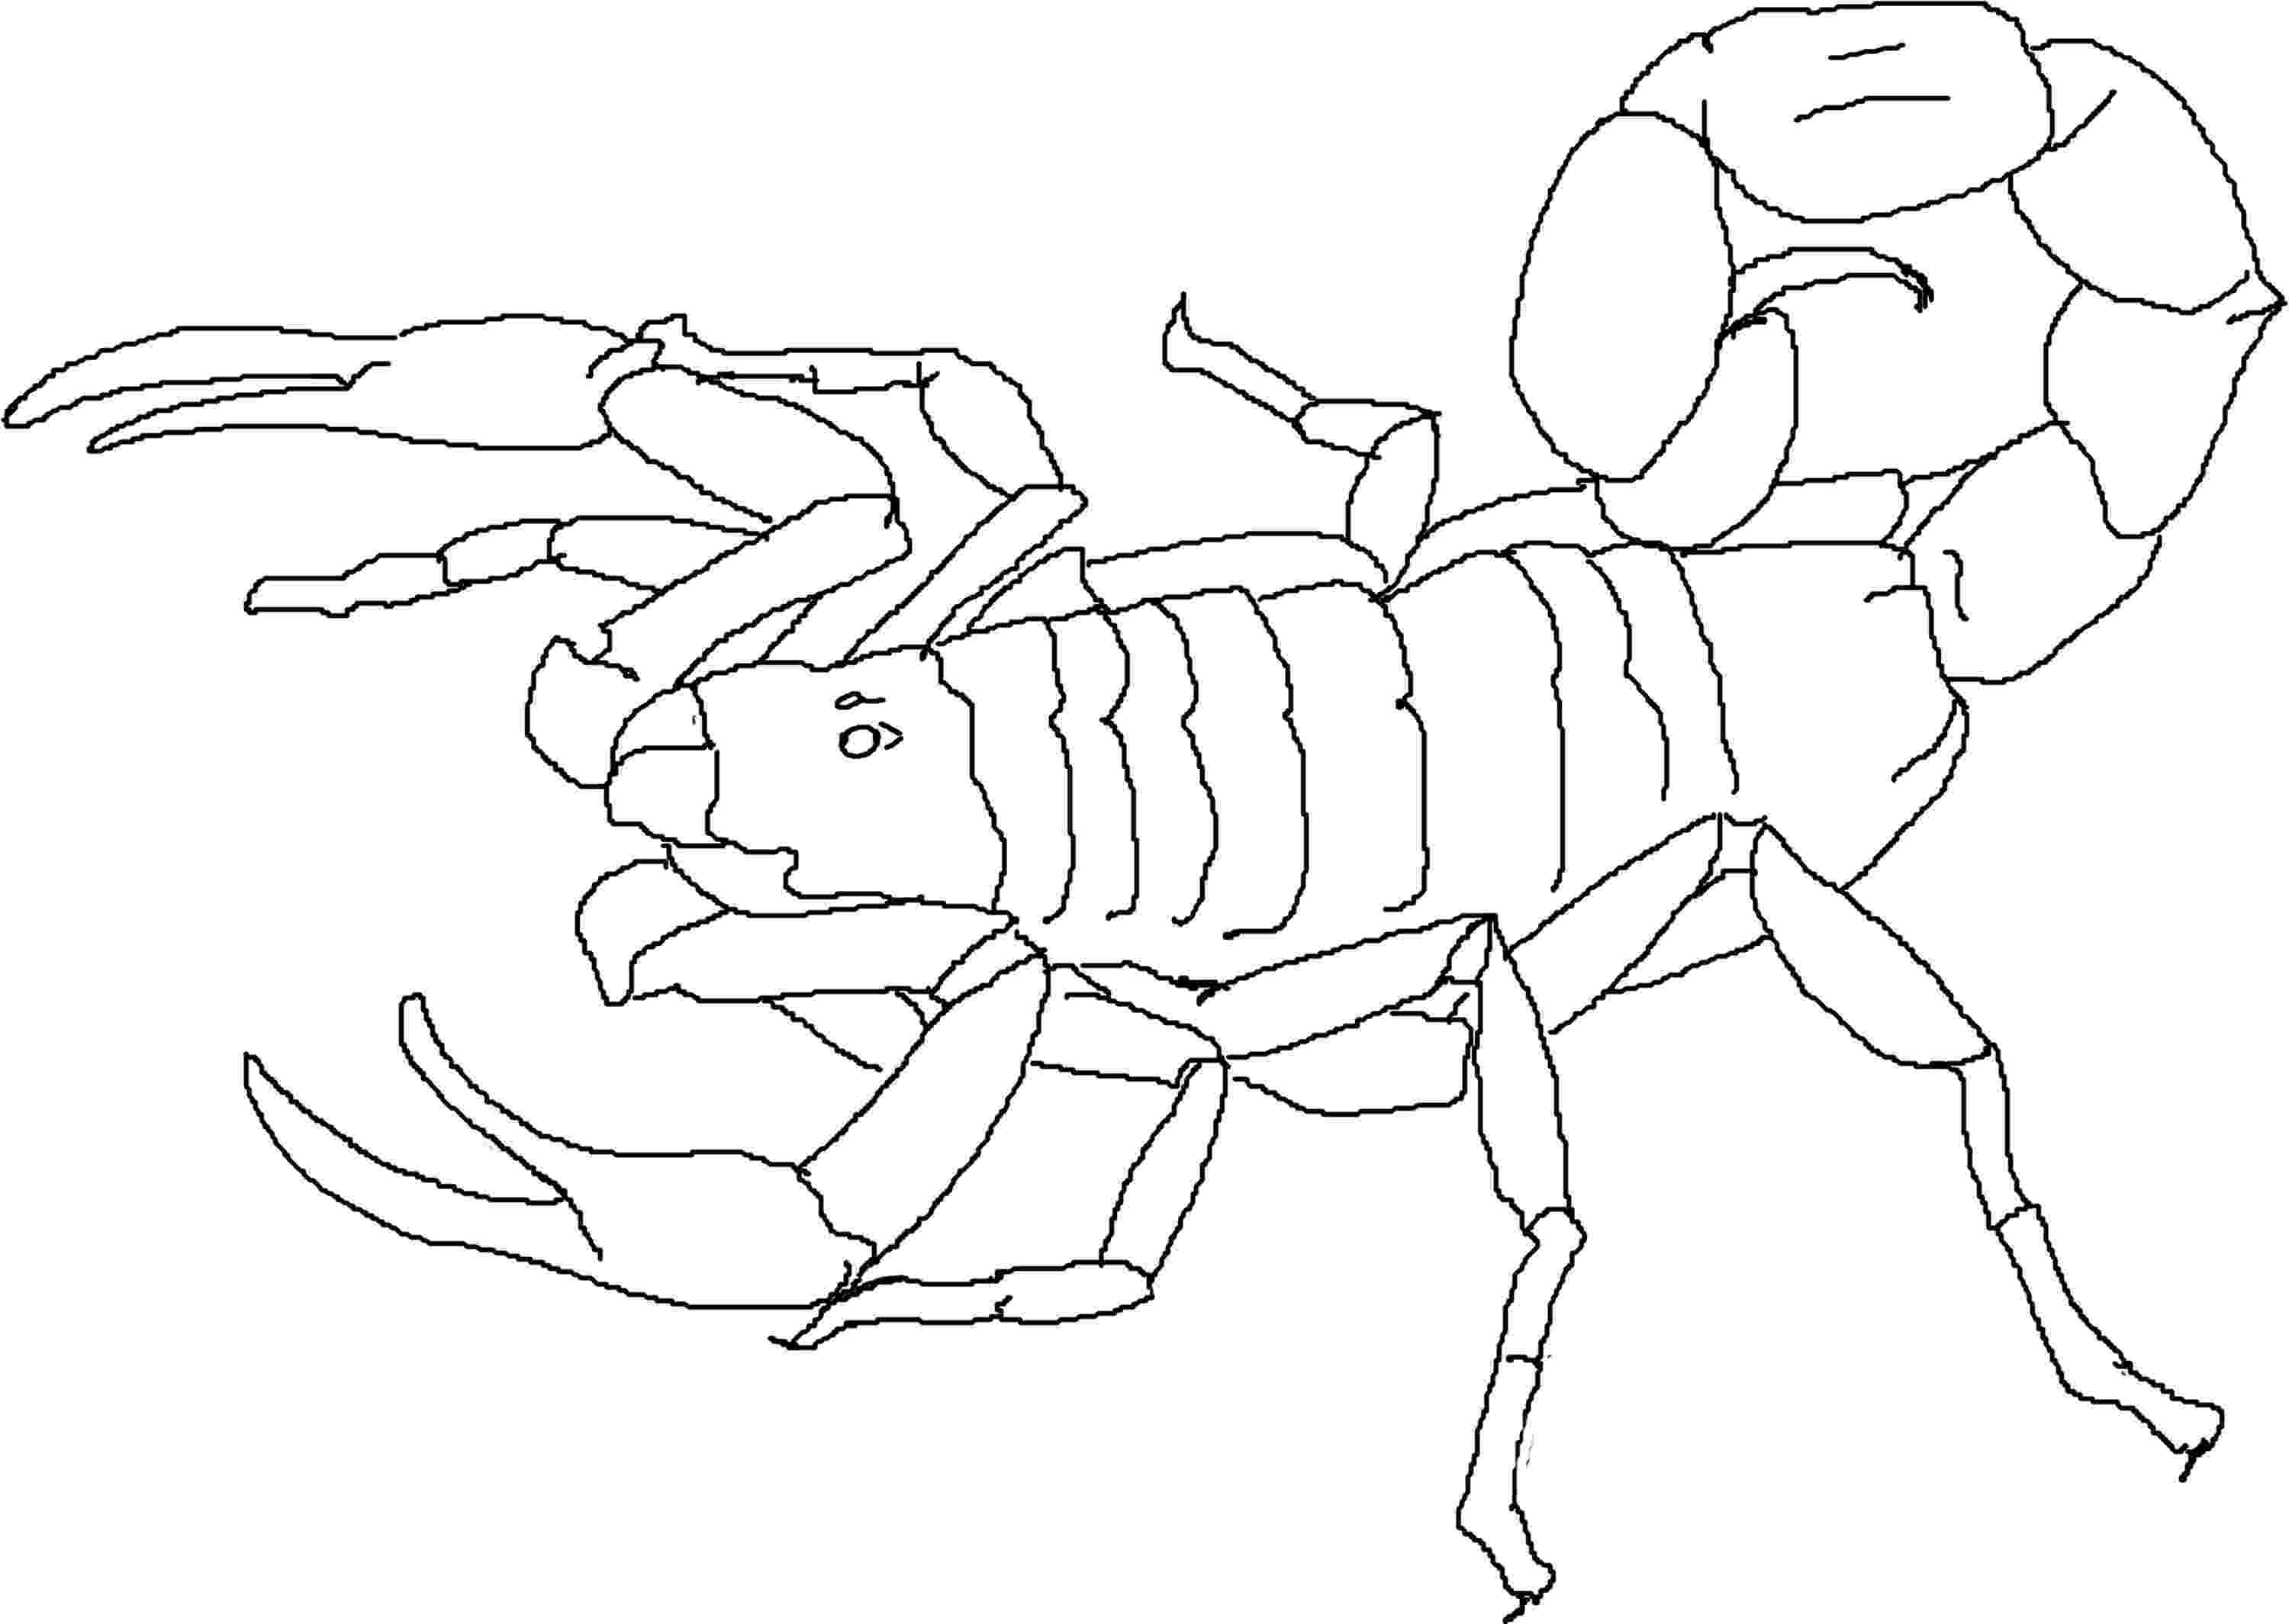 scorpion pictures to color free printable scorpion coloring pages for kids scorpion pictures to color 